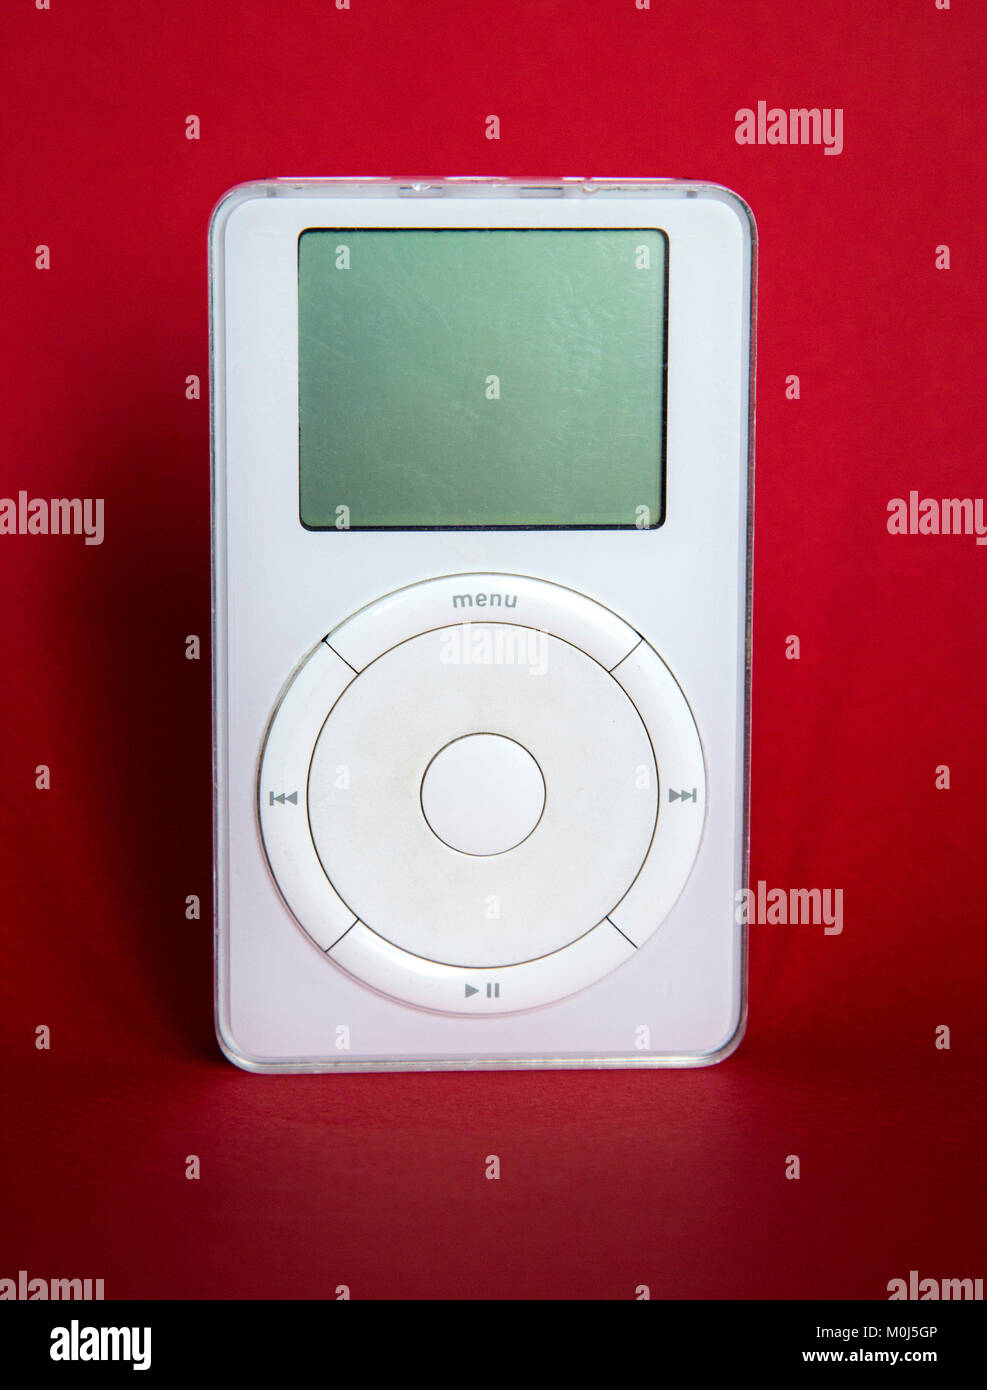 Original first generation iPod from Apple. The original MP3 player. Stock Photo